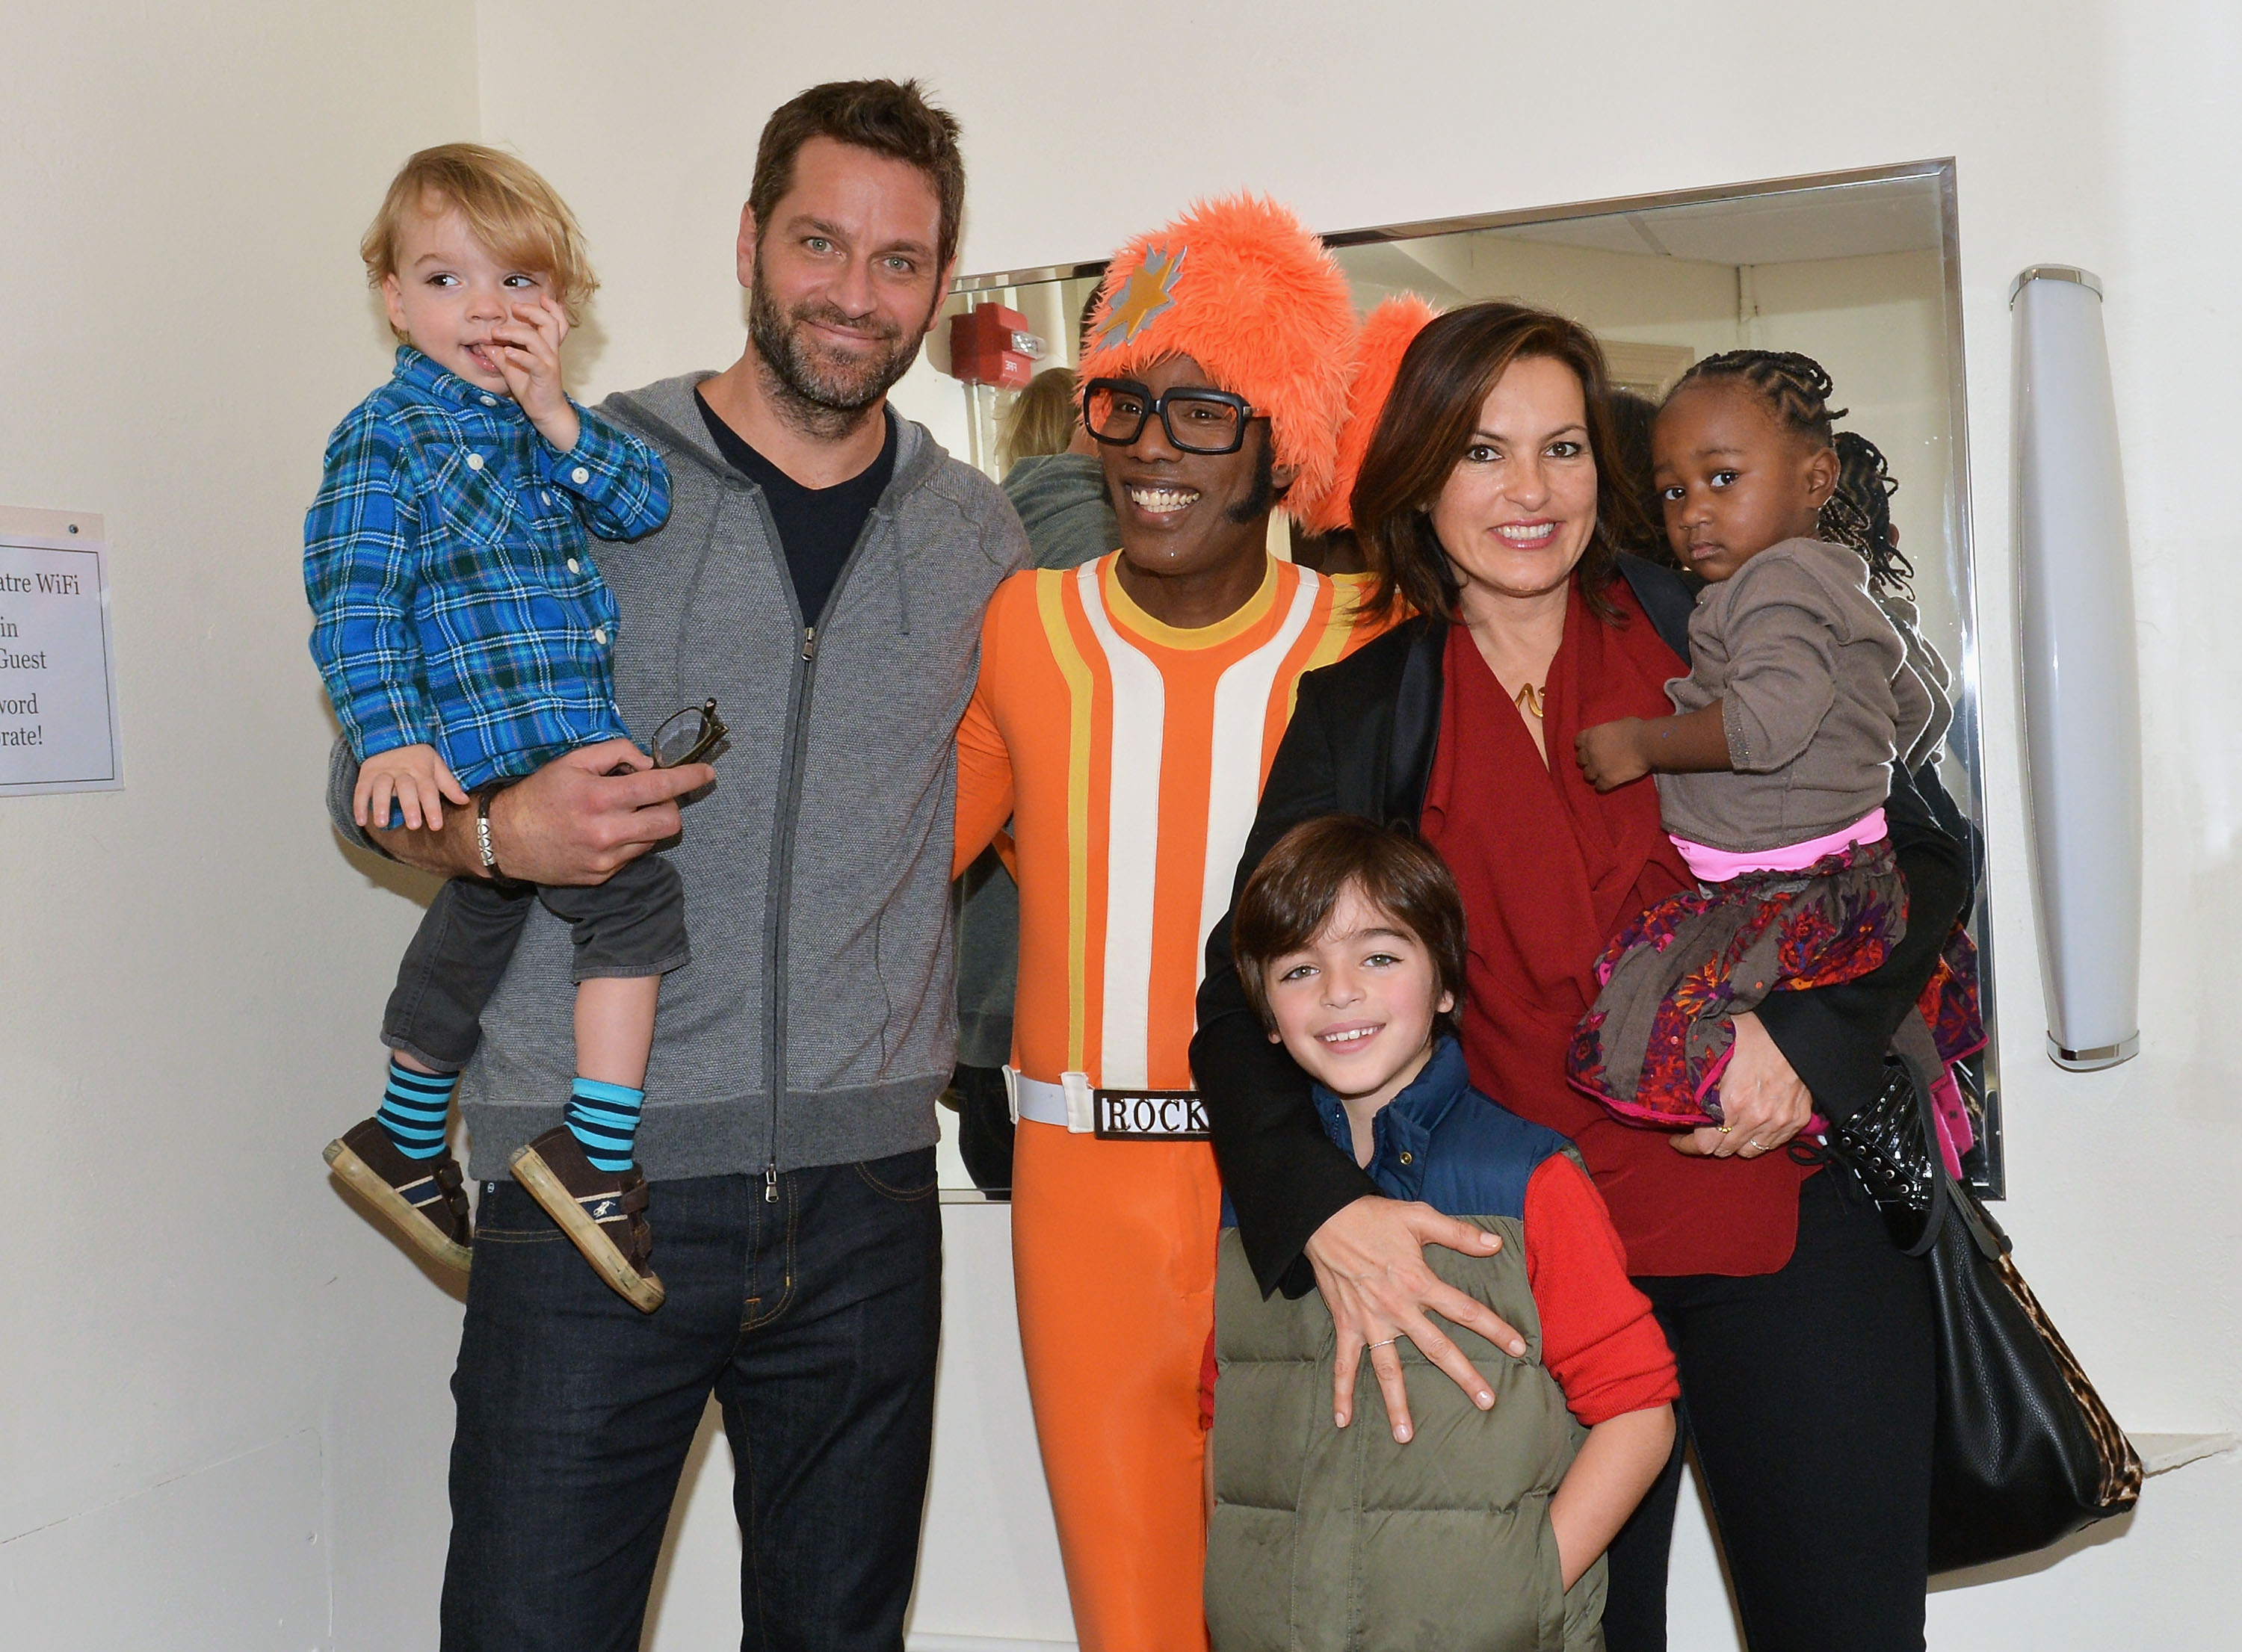 DJ Lance Rock and the Hermann family had a blast at "Yo Gabba Gabba! Live!" on December 21, 2013. | Source: Getty Images